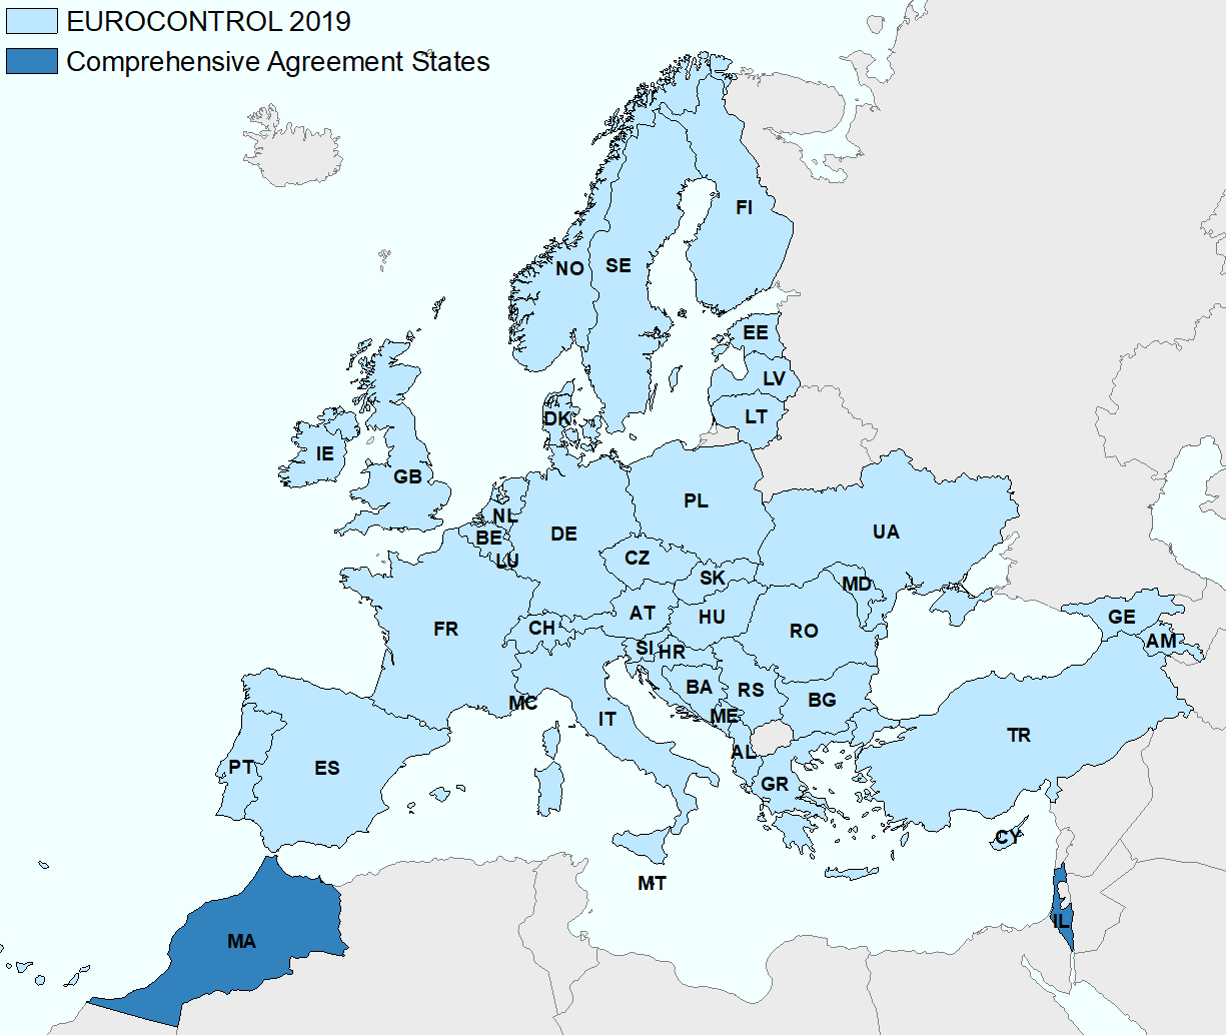 European Airspace and EUROCONTROL Member States